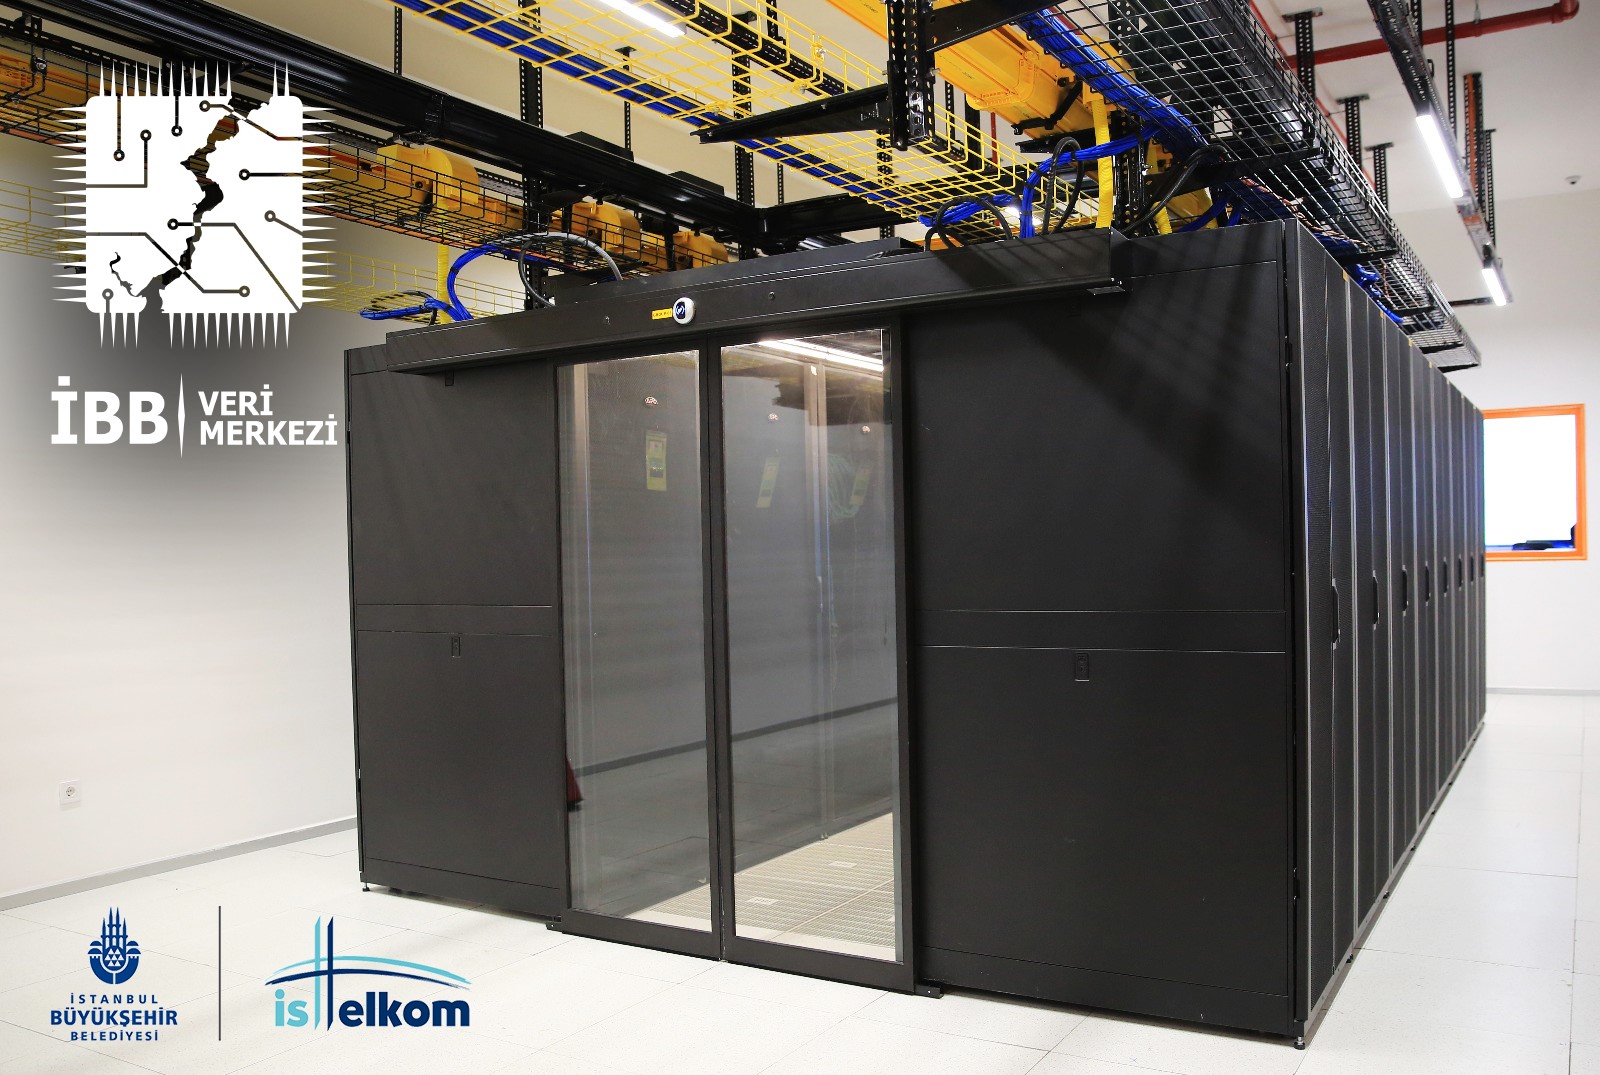 IMM (ISTANBUL METROPOLİTAN MUNİCİPALİTY) HAS INCREASED ITS DATA CENTRE CAPACITY BY 3 TIMES